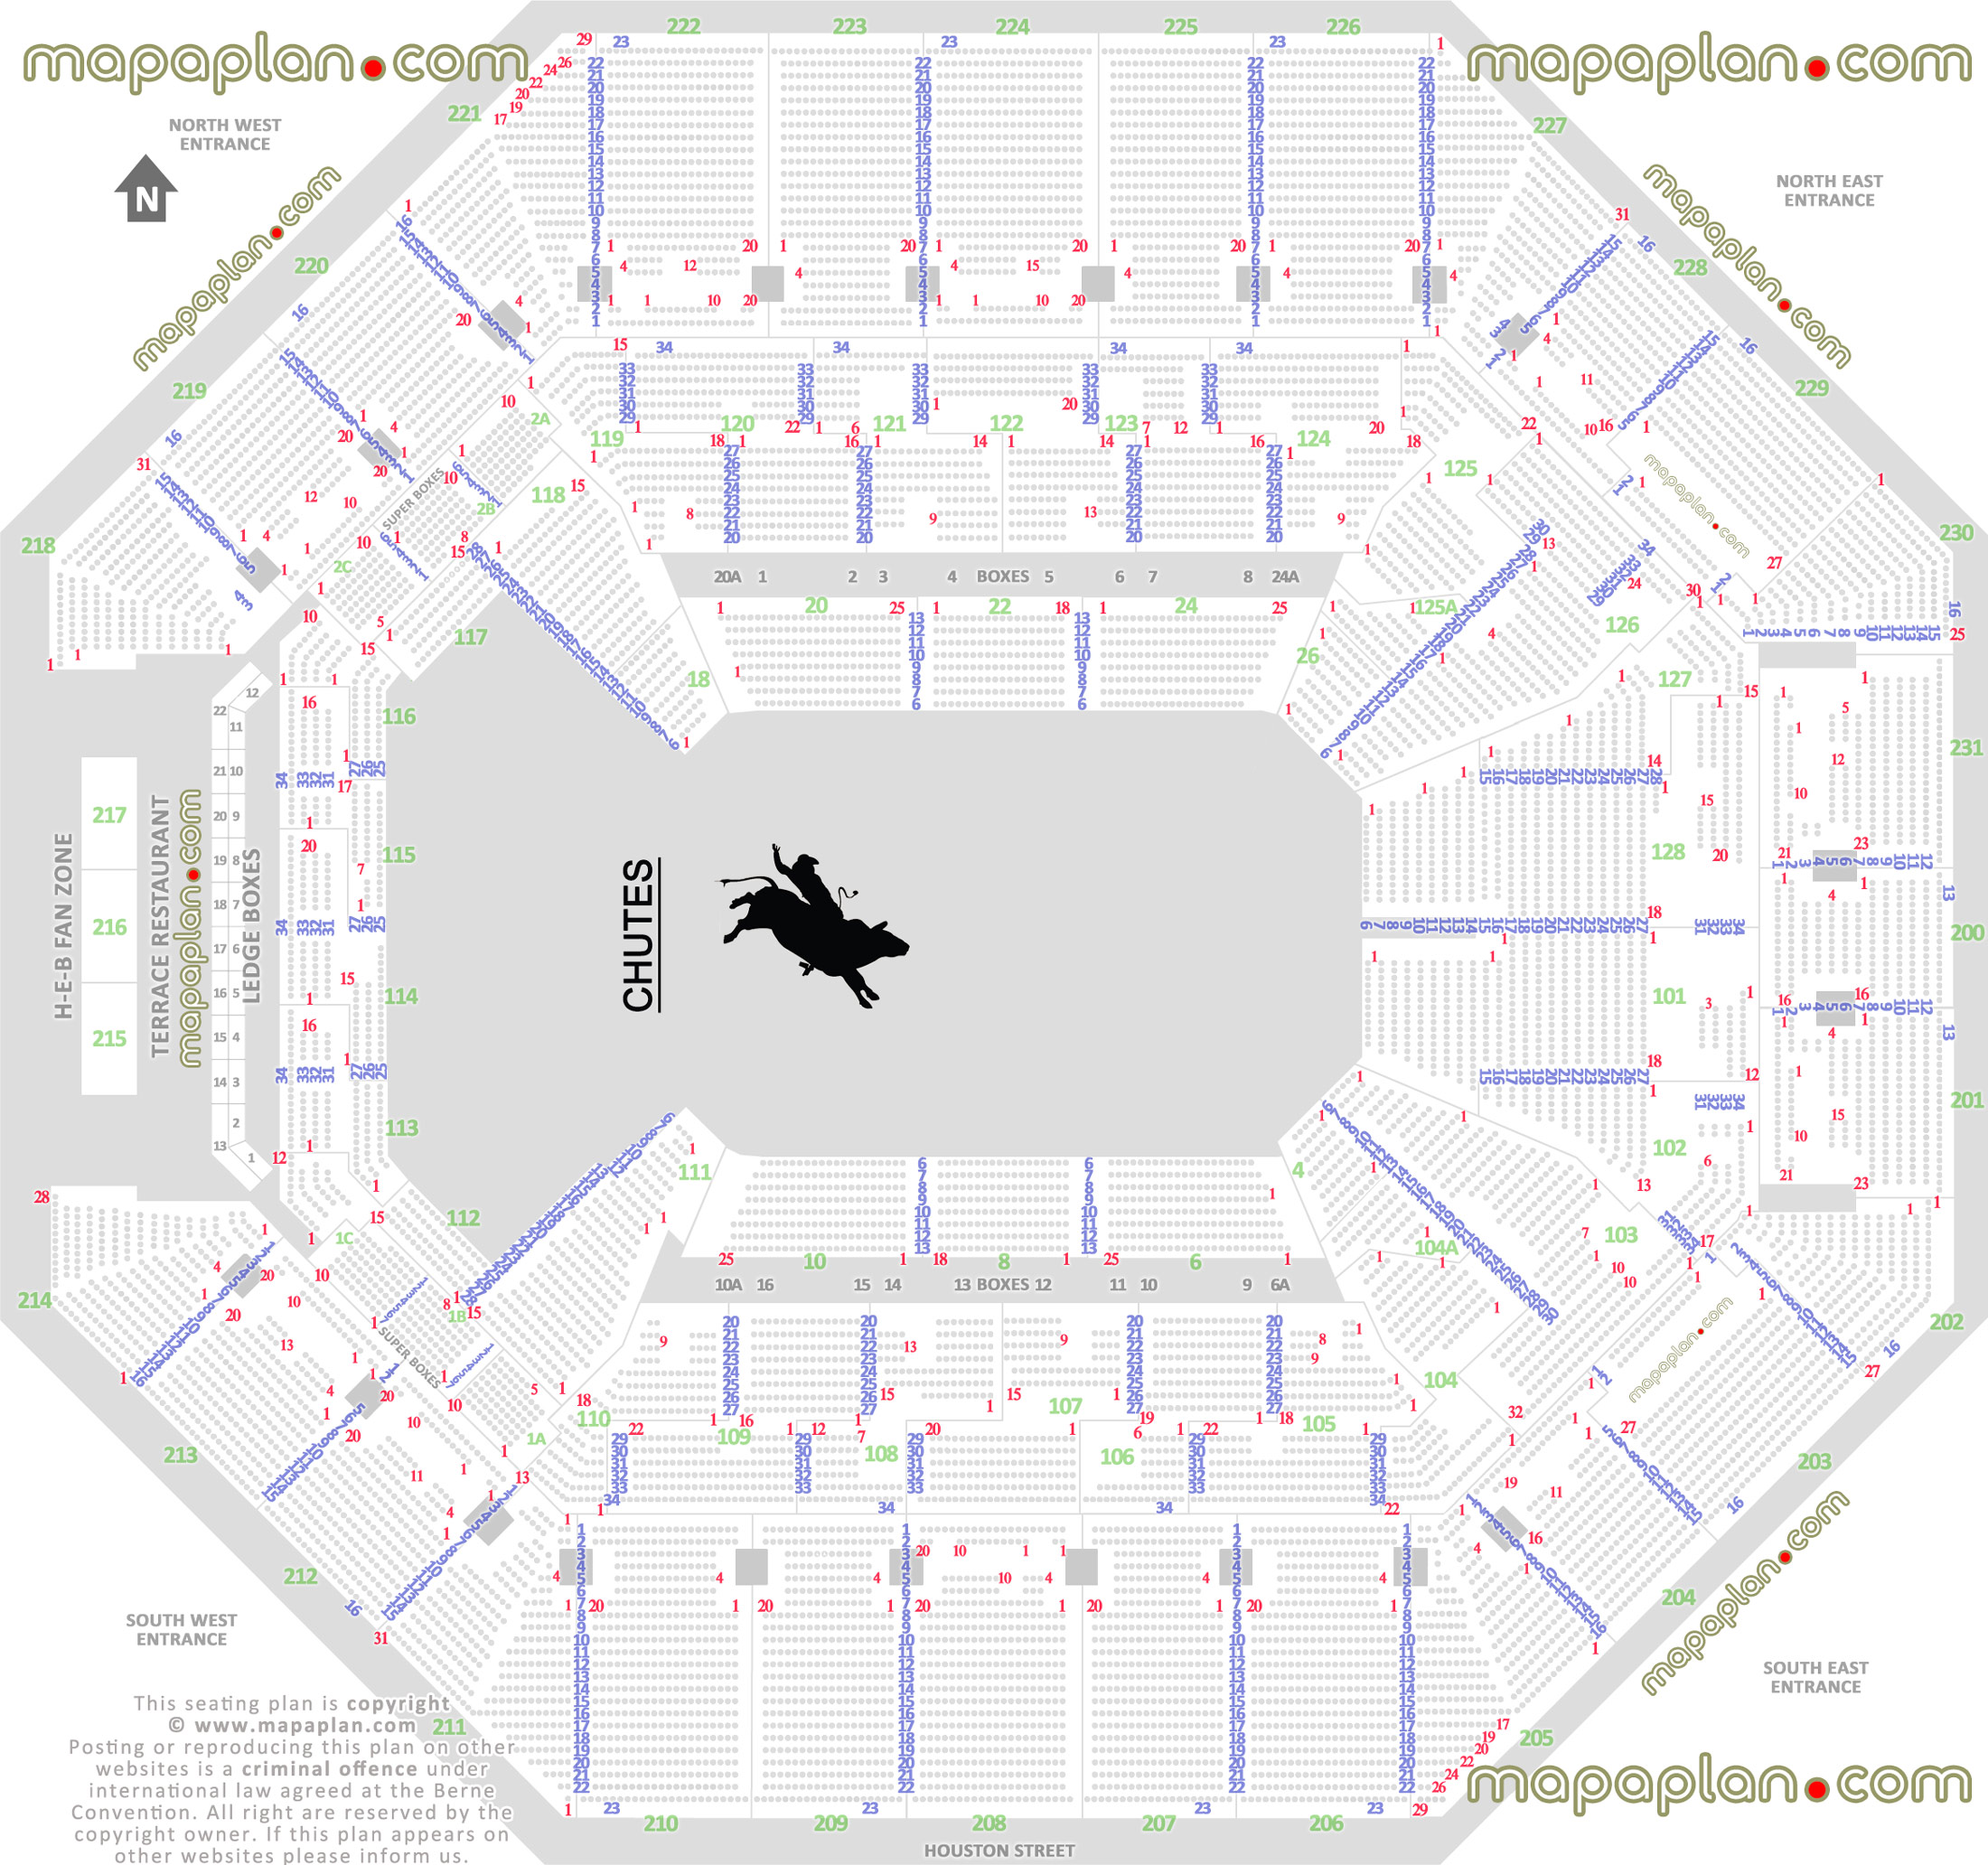 rodeo stock show prca detailed fully seated chart setup standing room only sro area wheelchair disabled handicap accessible seats plan arena main entrance gate exits map San Antonio ATT Center seating chart